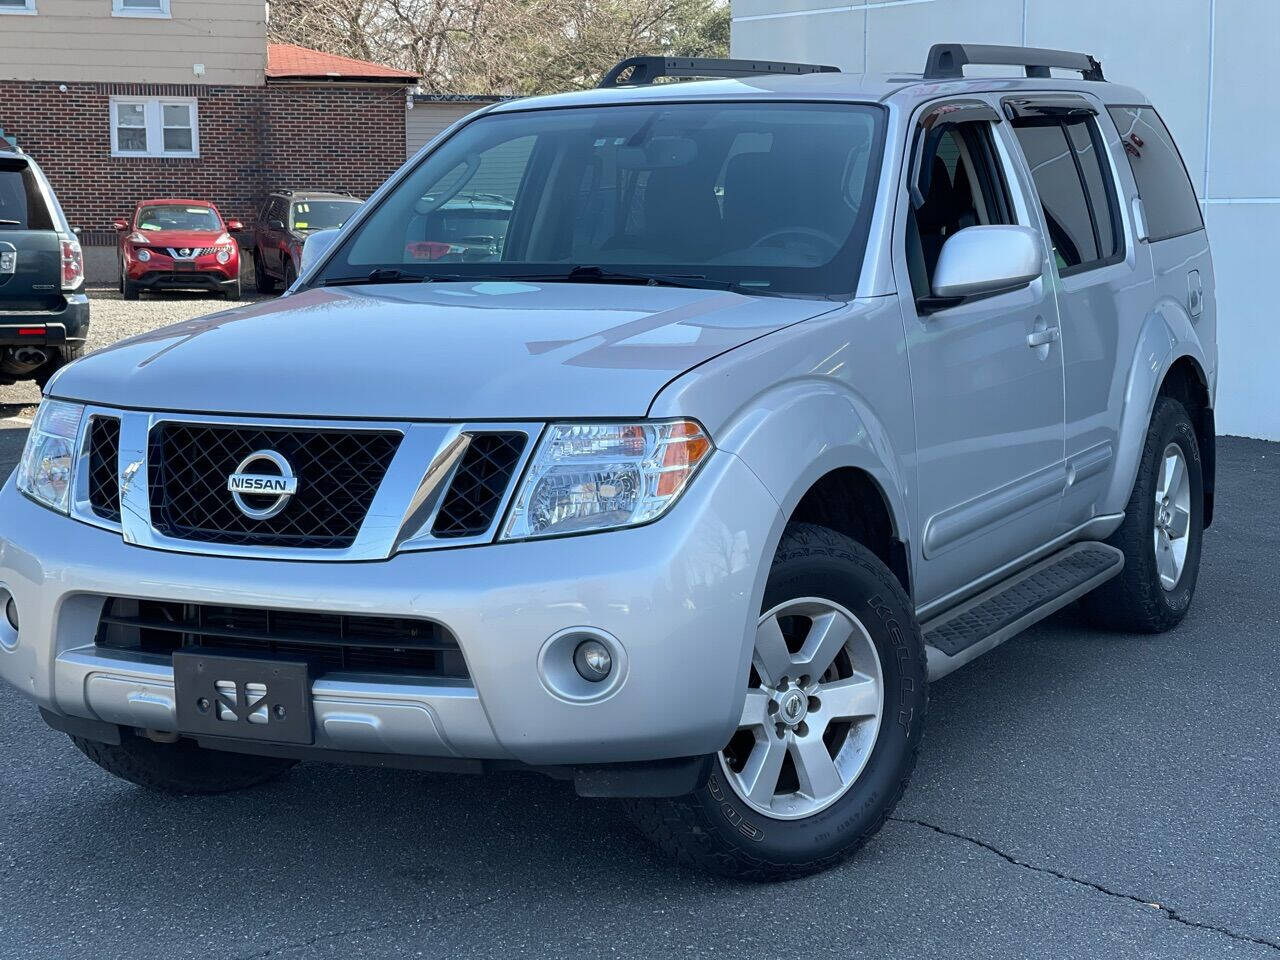 Used 2012 Nissan Pathfinder For Sale In Jersey City, NJ